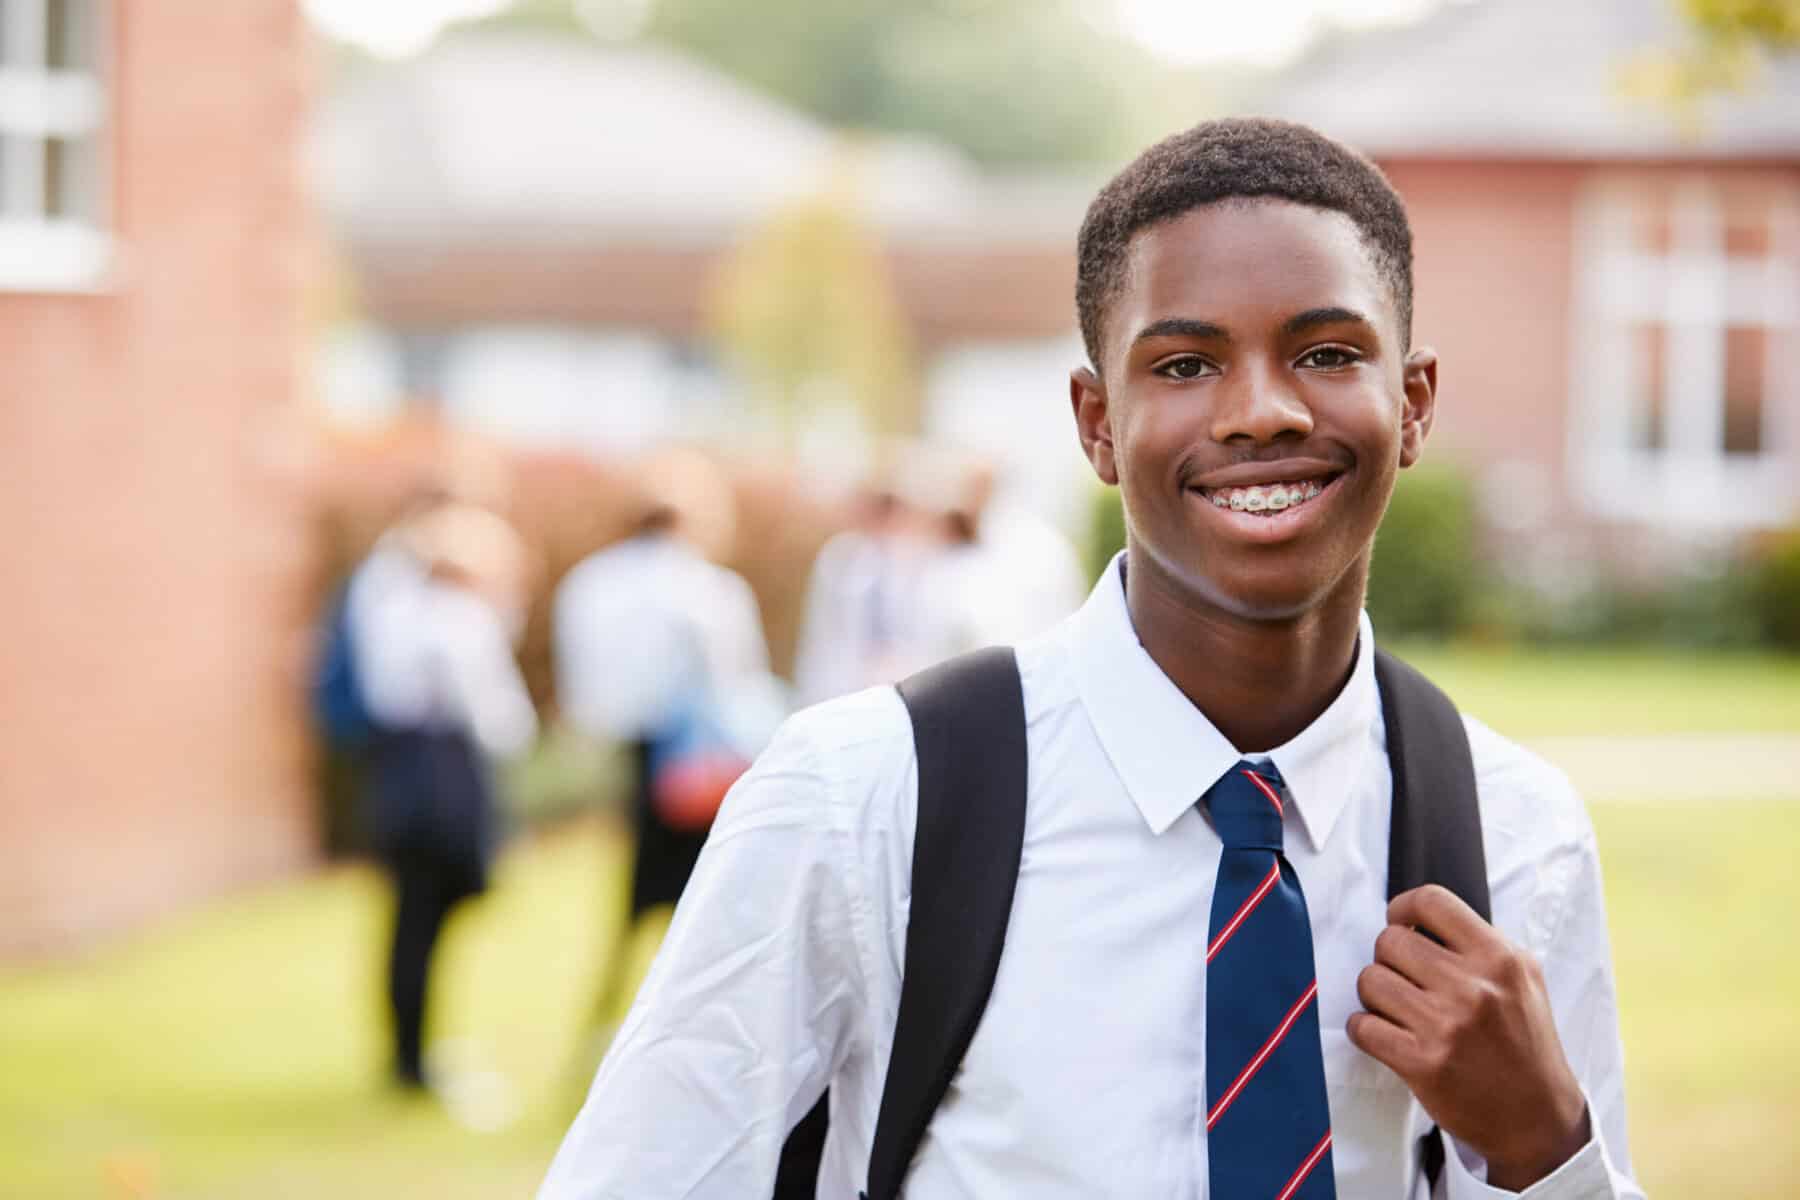 Private school teen boy with braces smiling and holding a backpack